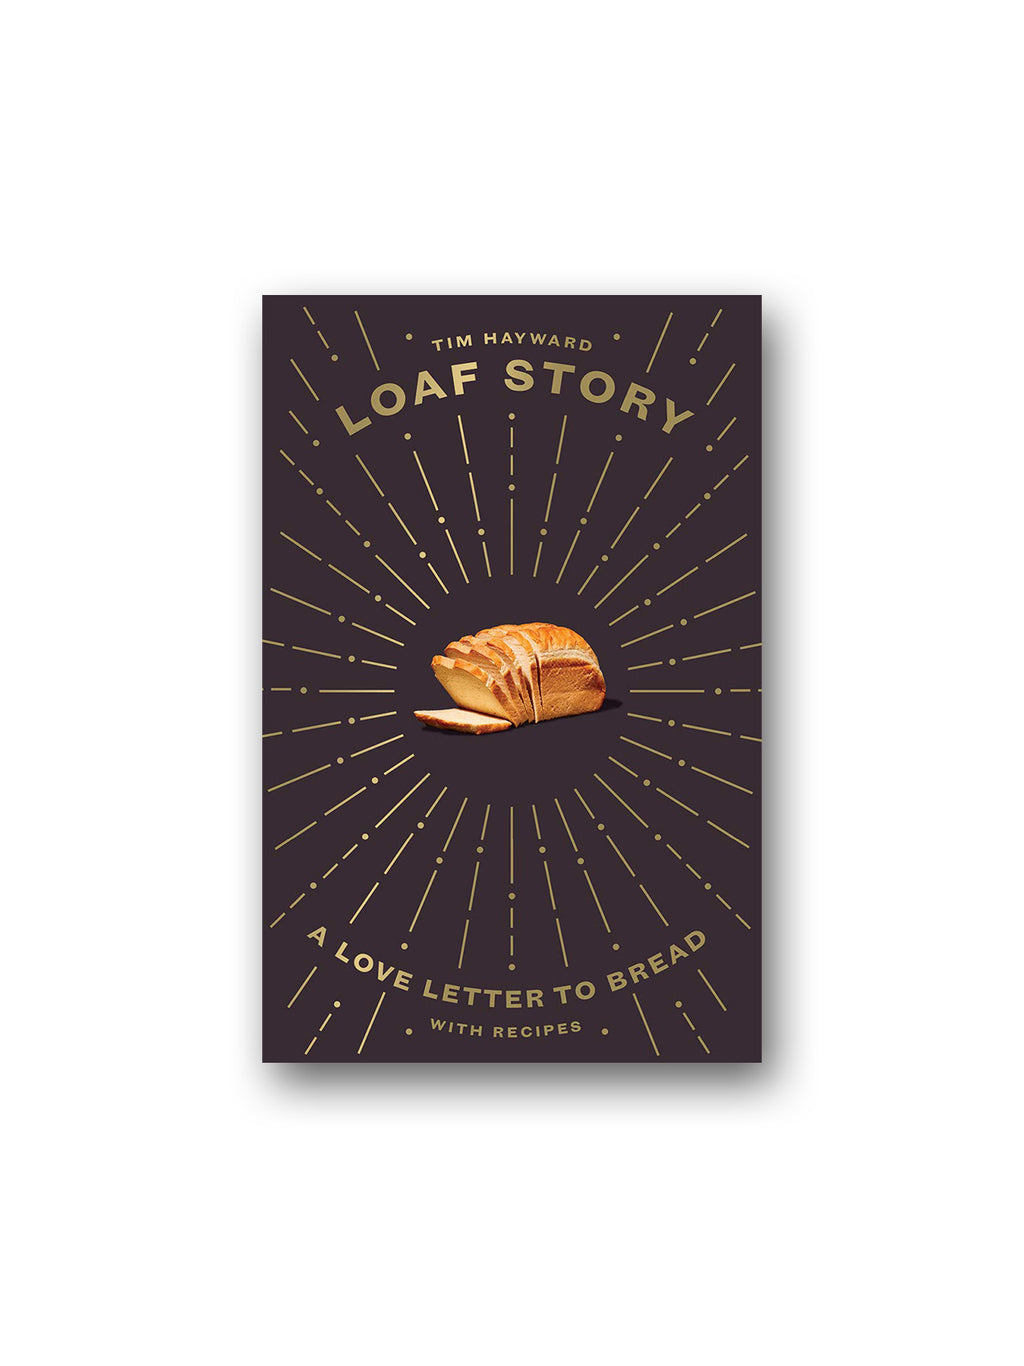 Loaf Story : A Love-letter to Bread, with Recipes